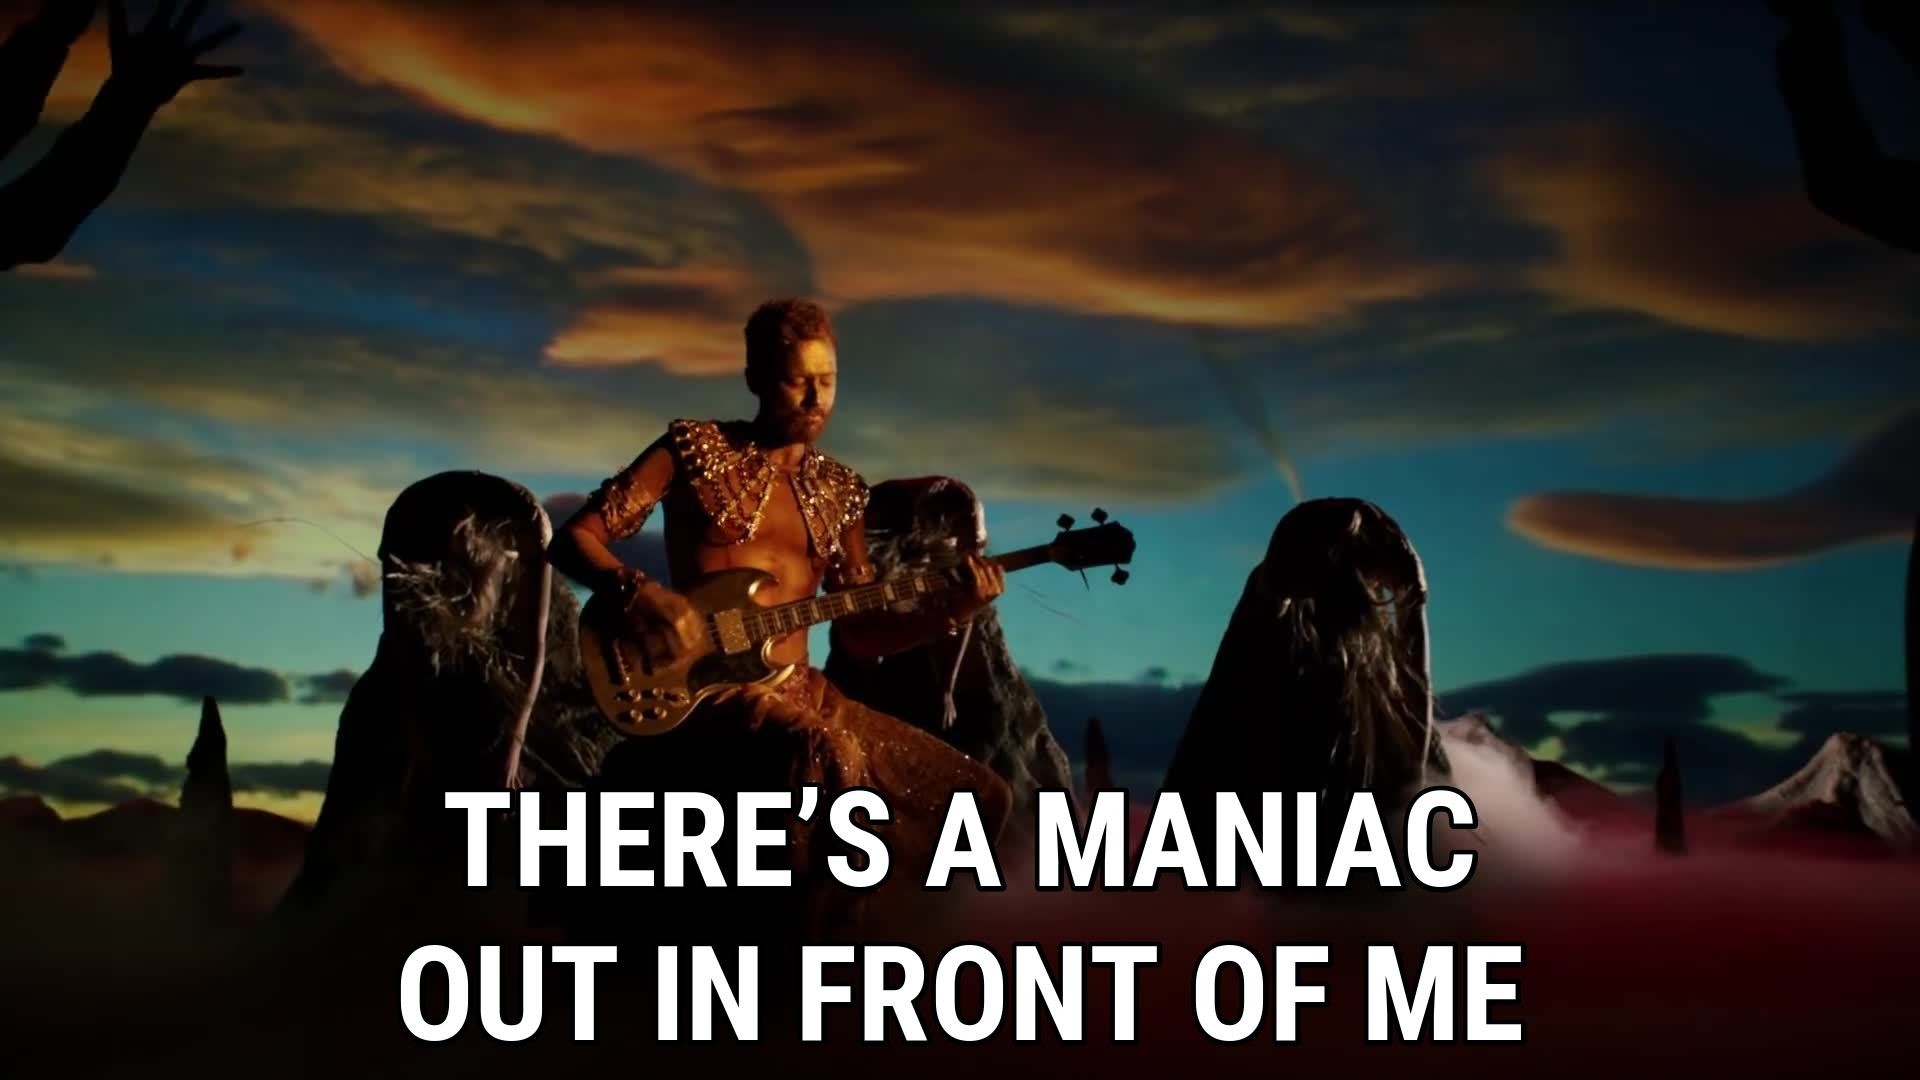 1920x1080 There's a maniac out in front of me / OneRepublic